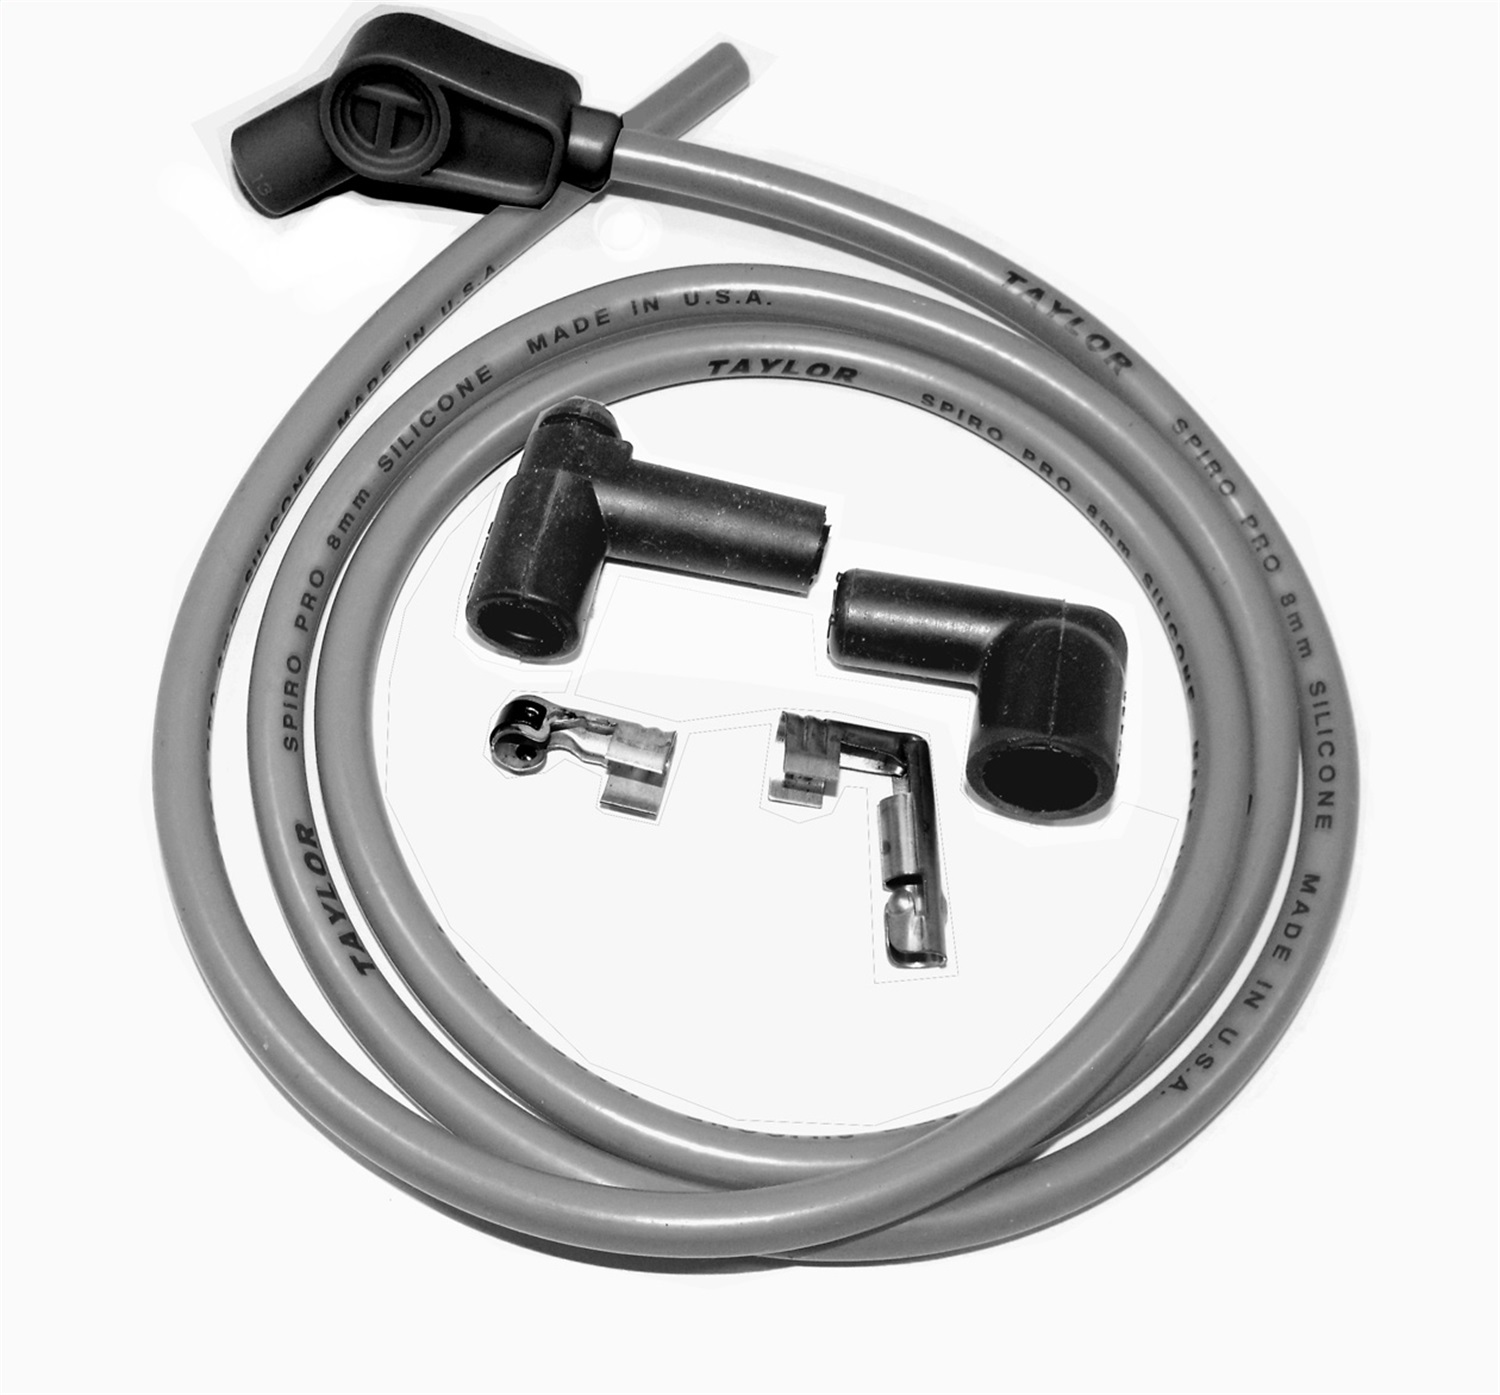 Taylor Cable Taylor Cable 45481 8mm Spiro Pro; Spark Plug Wire Repair Kit